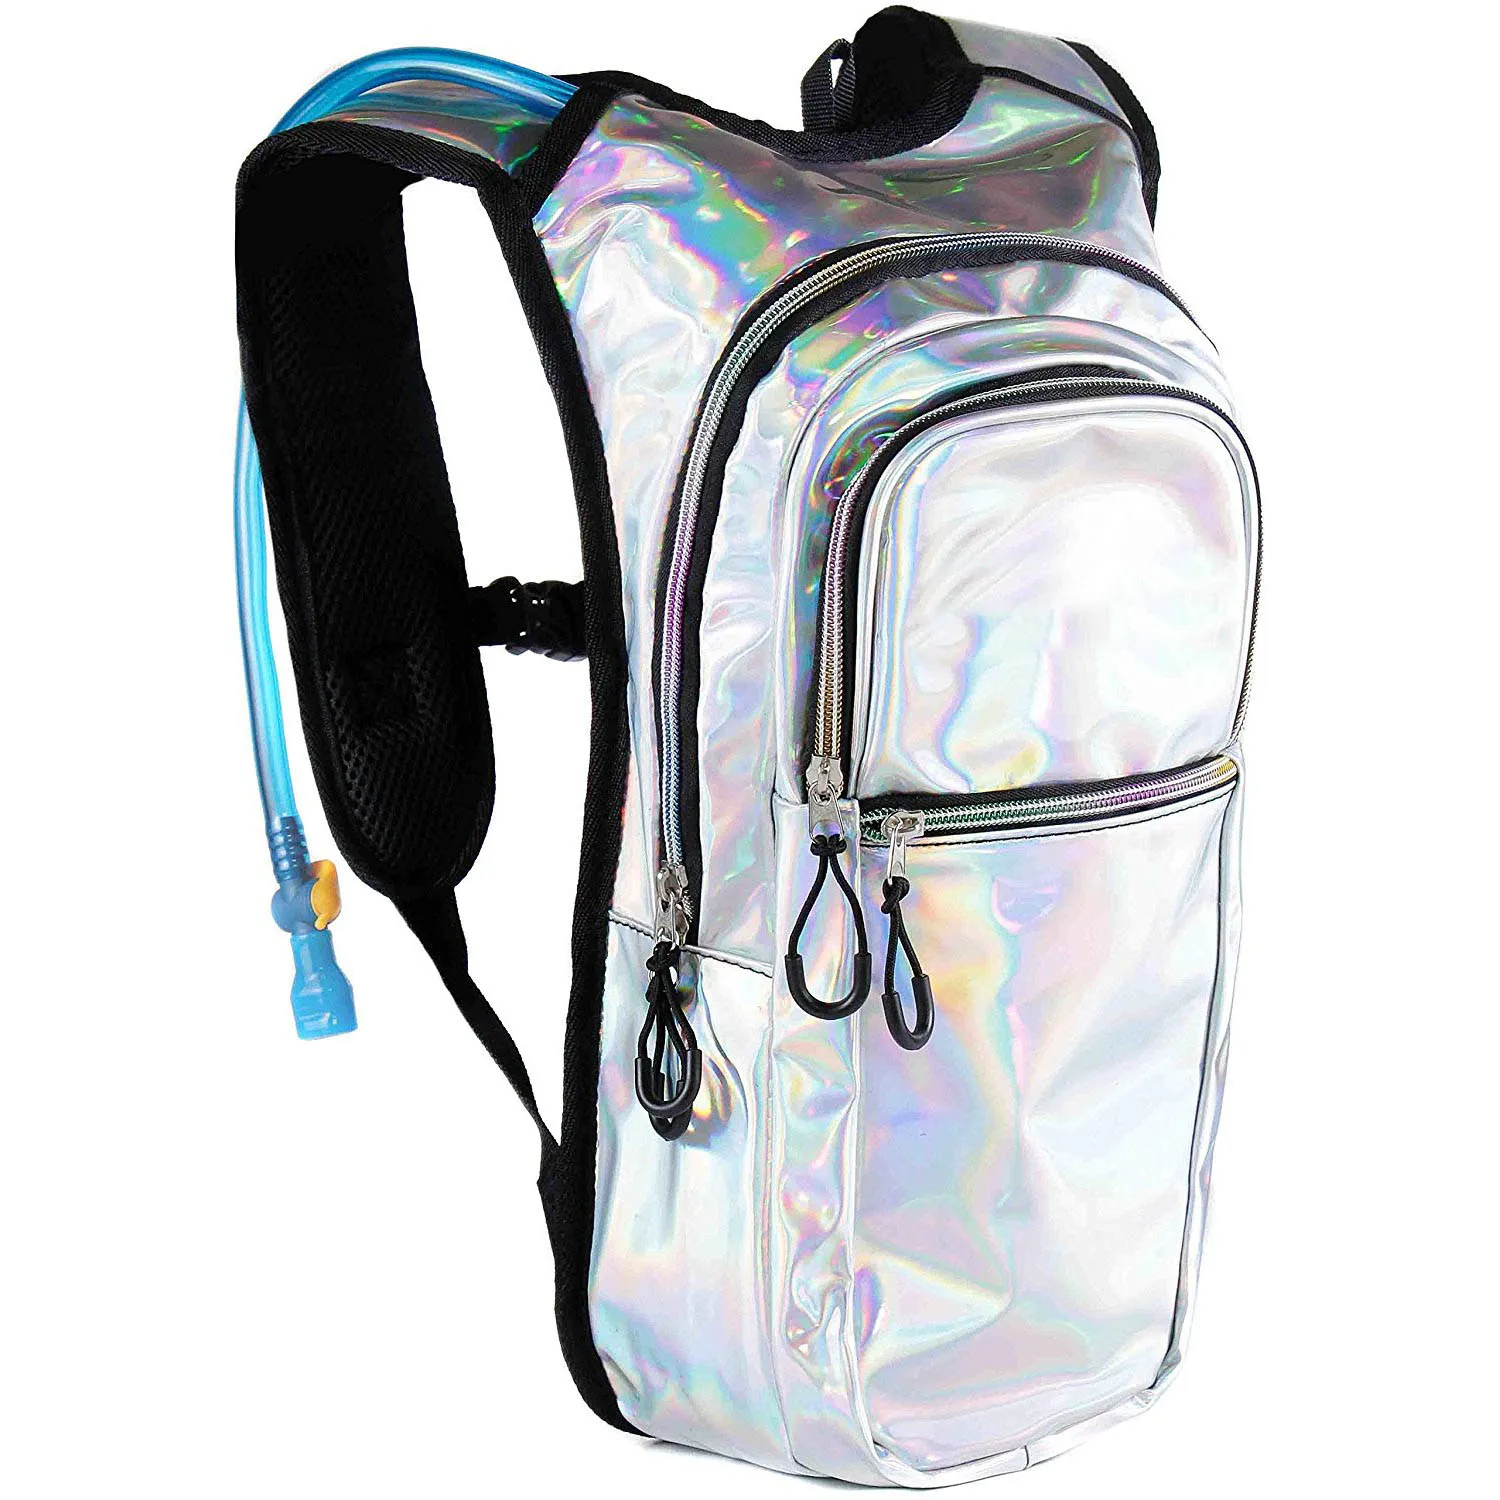 Rave Hydration Pack Backpack With 2l Water Bladder For Festivals,Raves